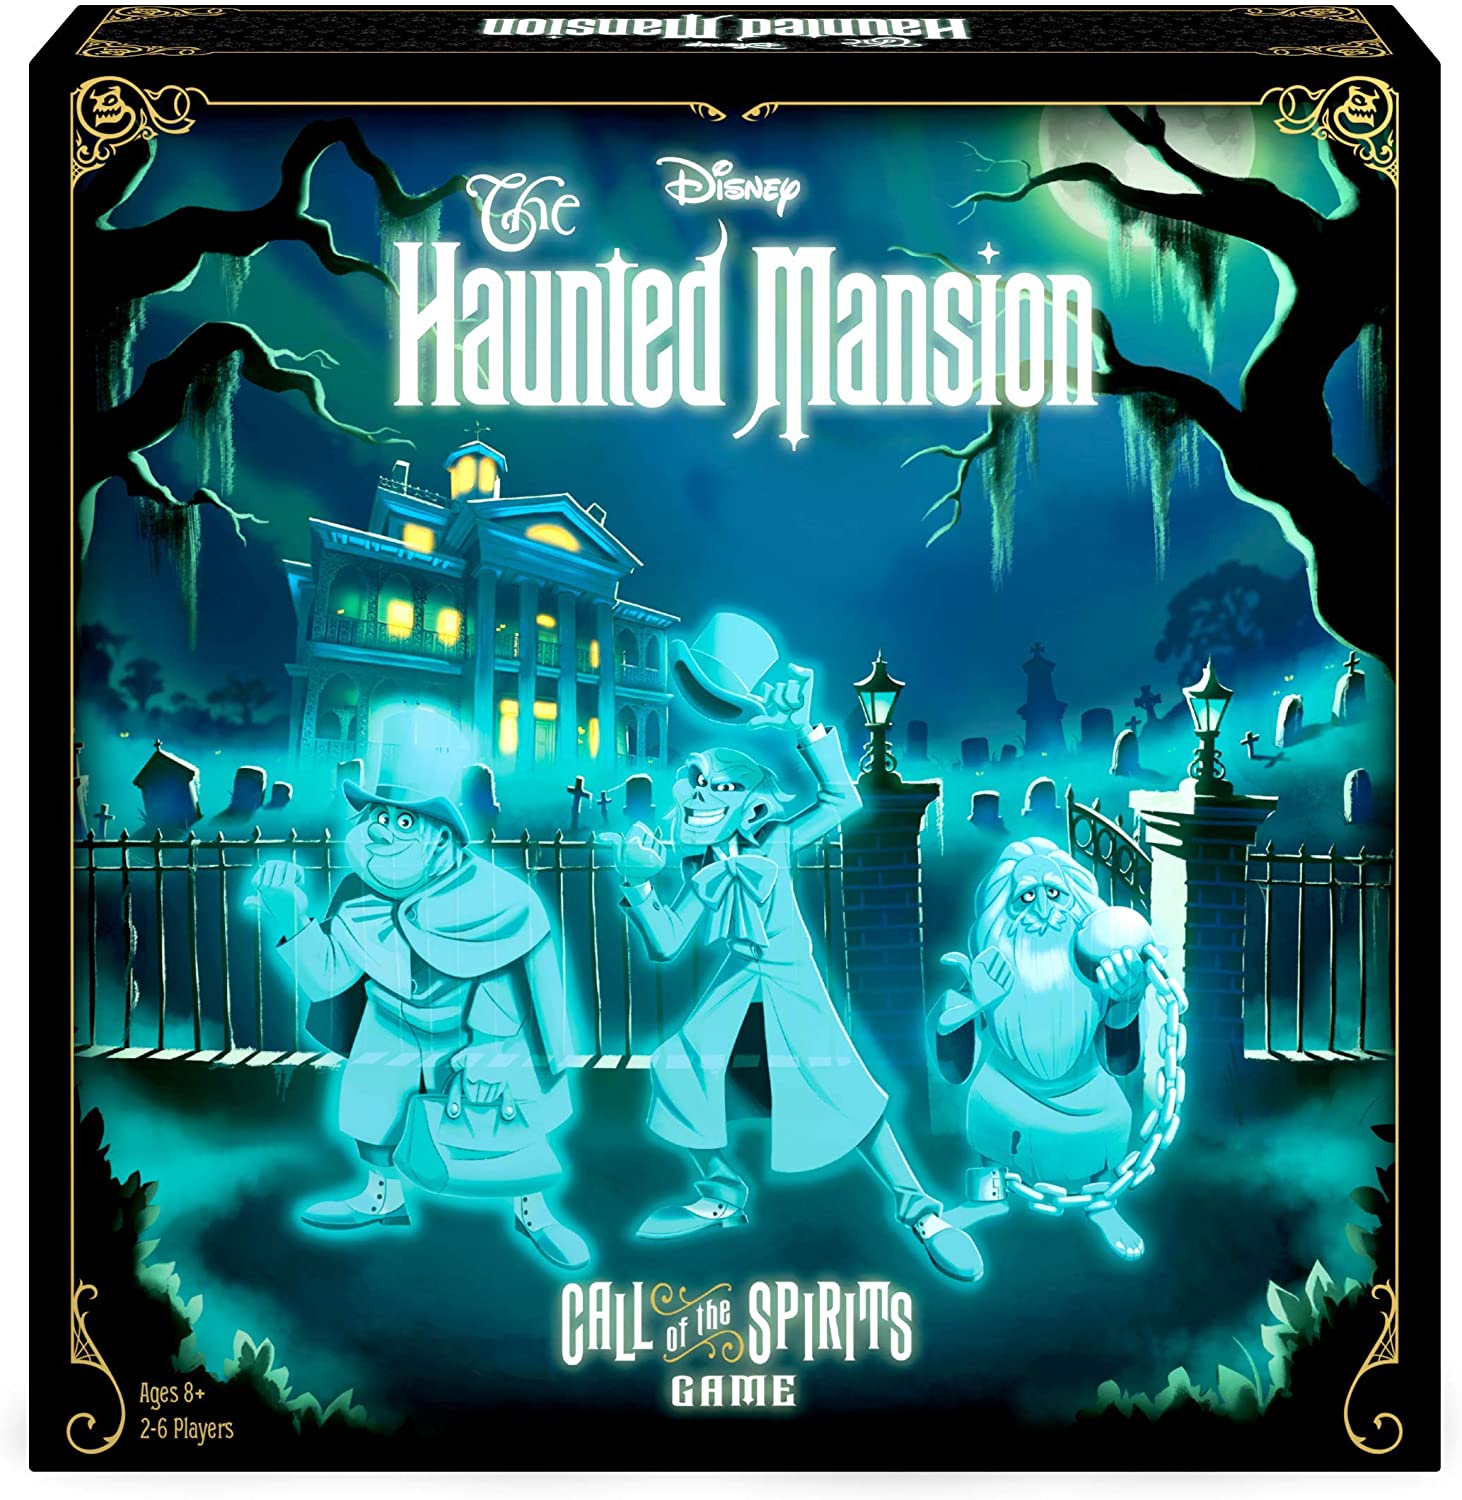 Disney's The Haunted Mansion: Call of the Spirits